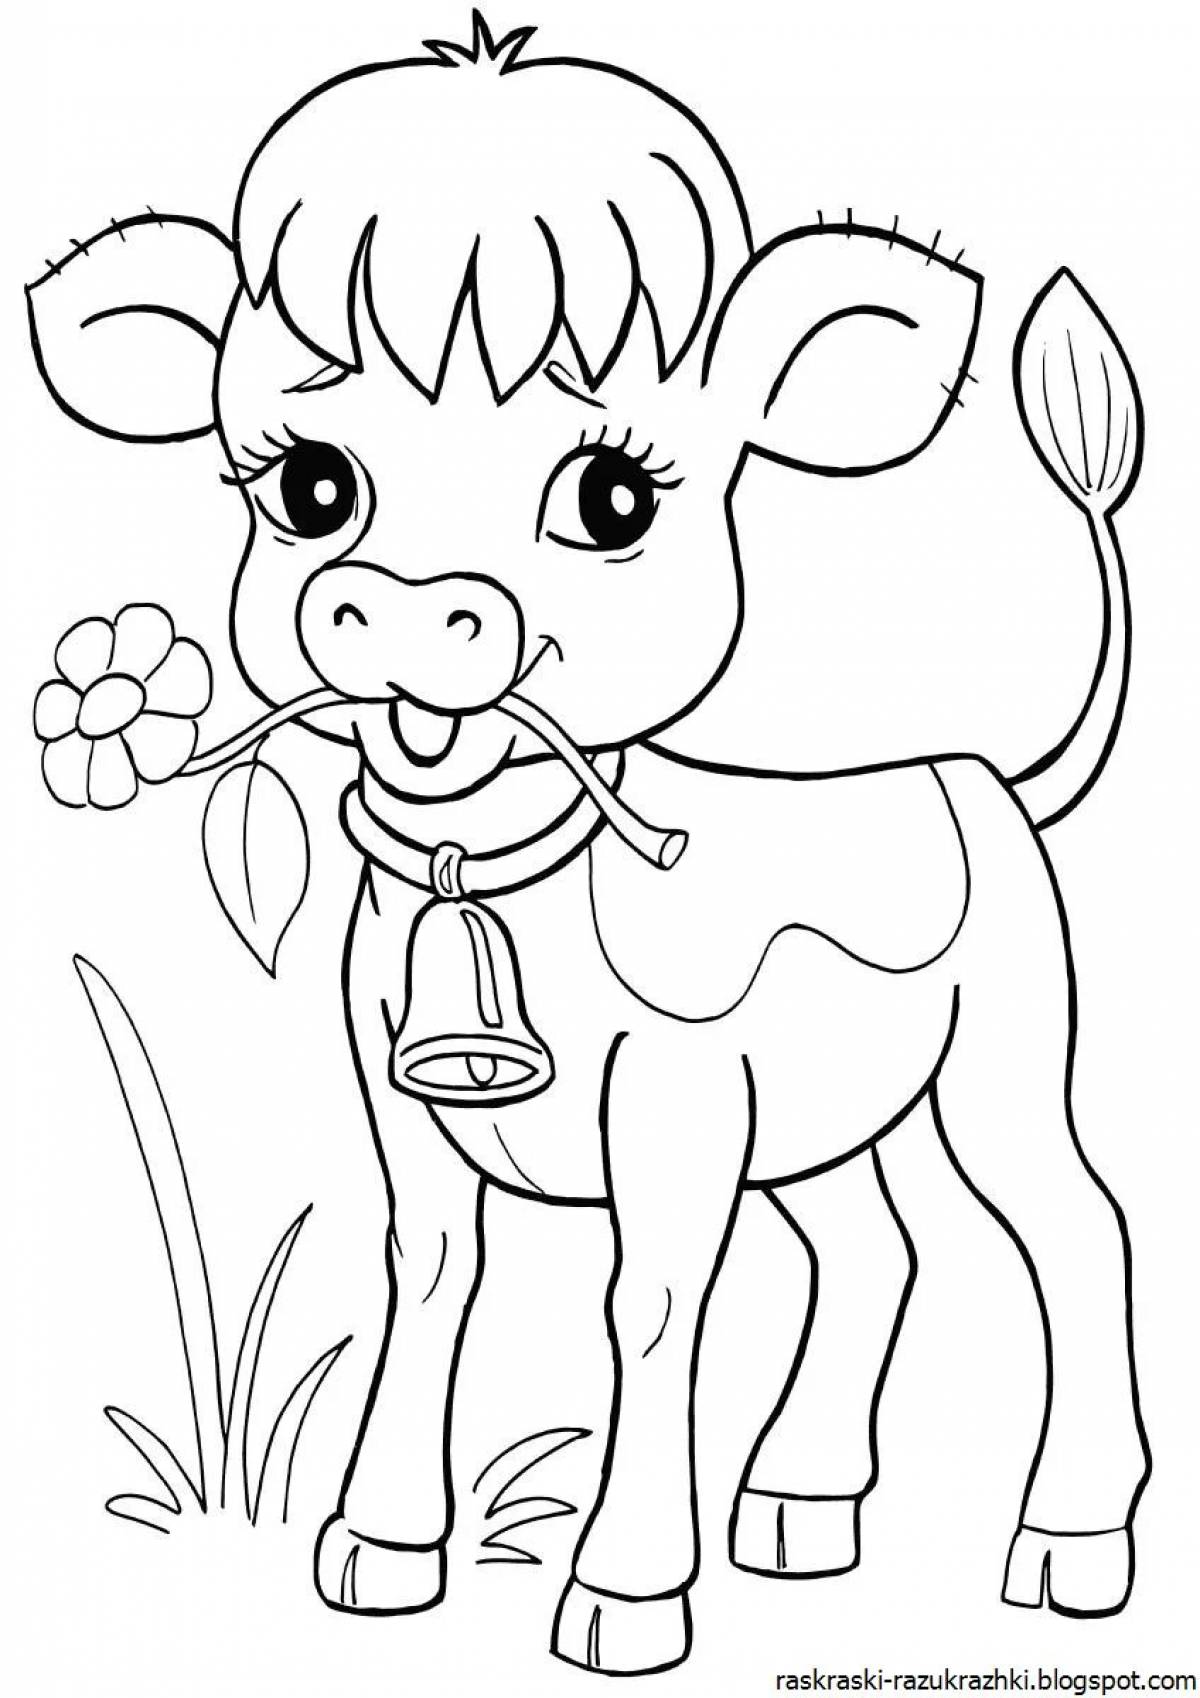 Coloring page glowing cute cow